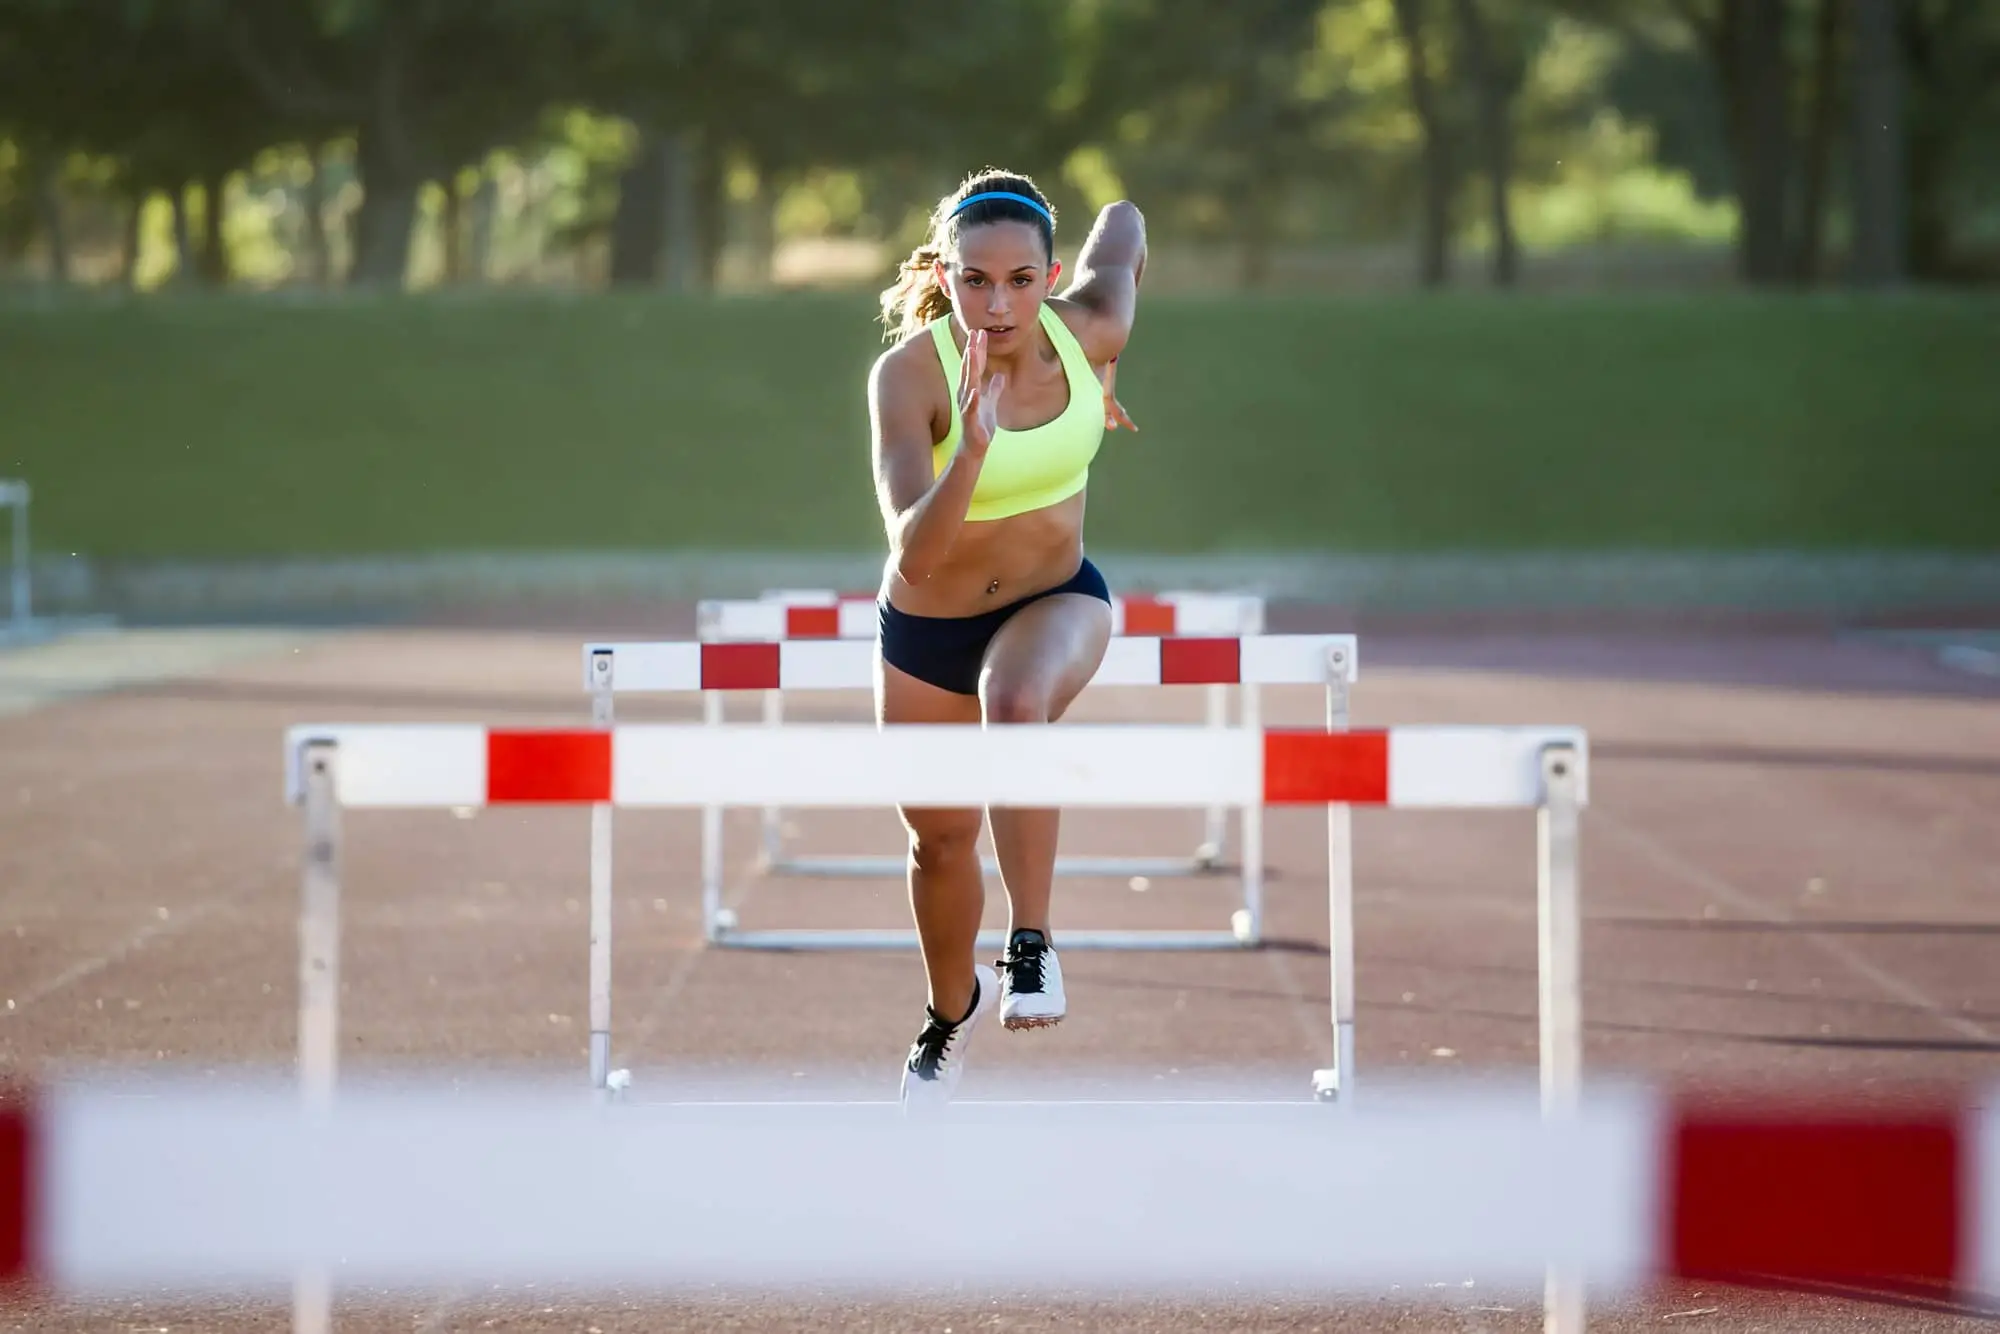 Young athlete jumping over a hurdle during training on race trac